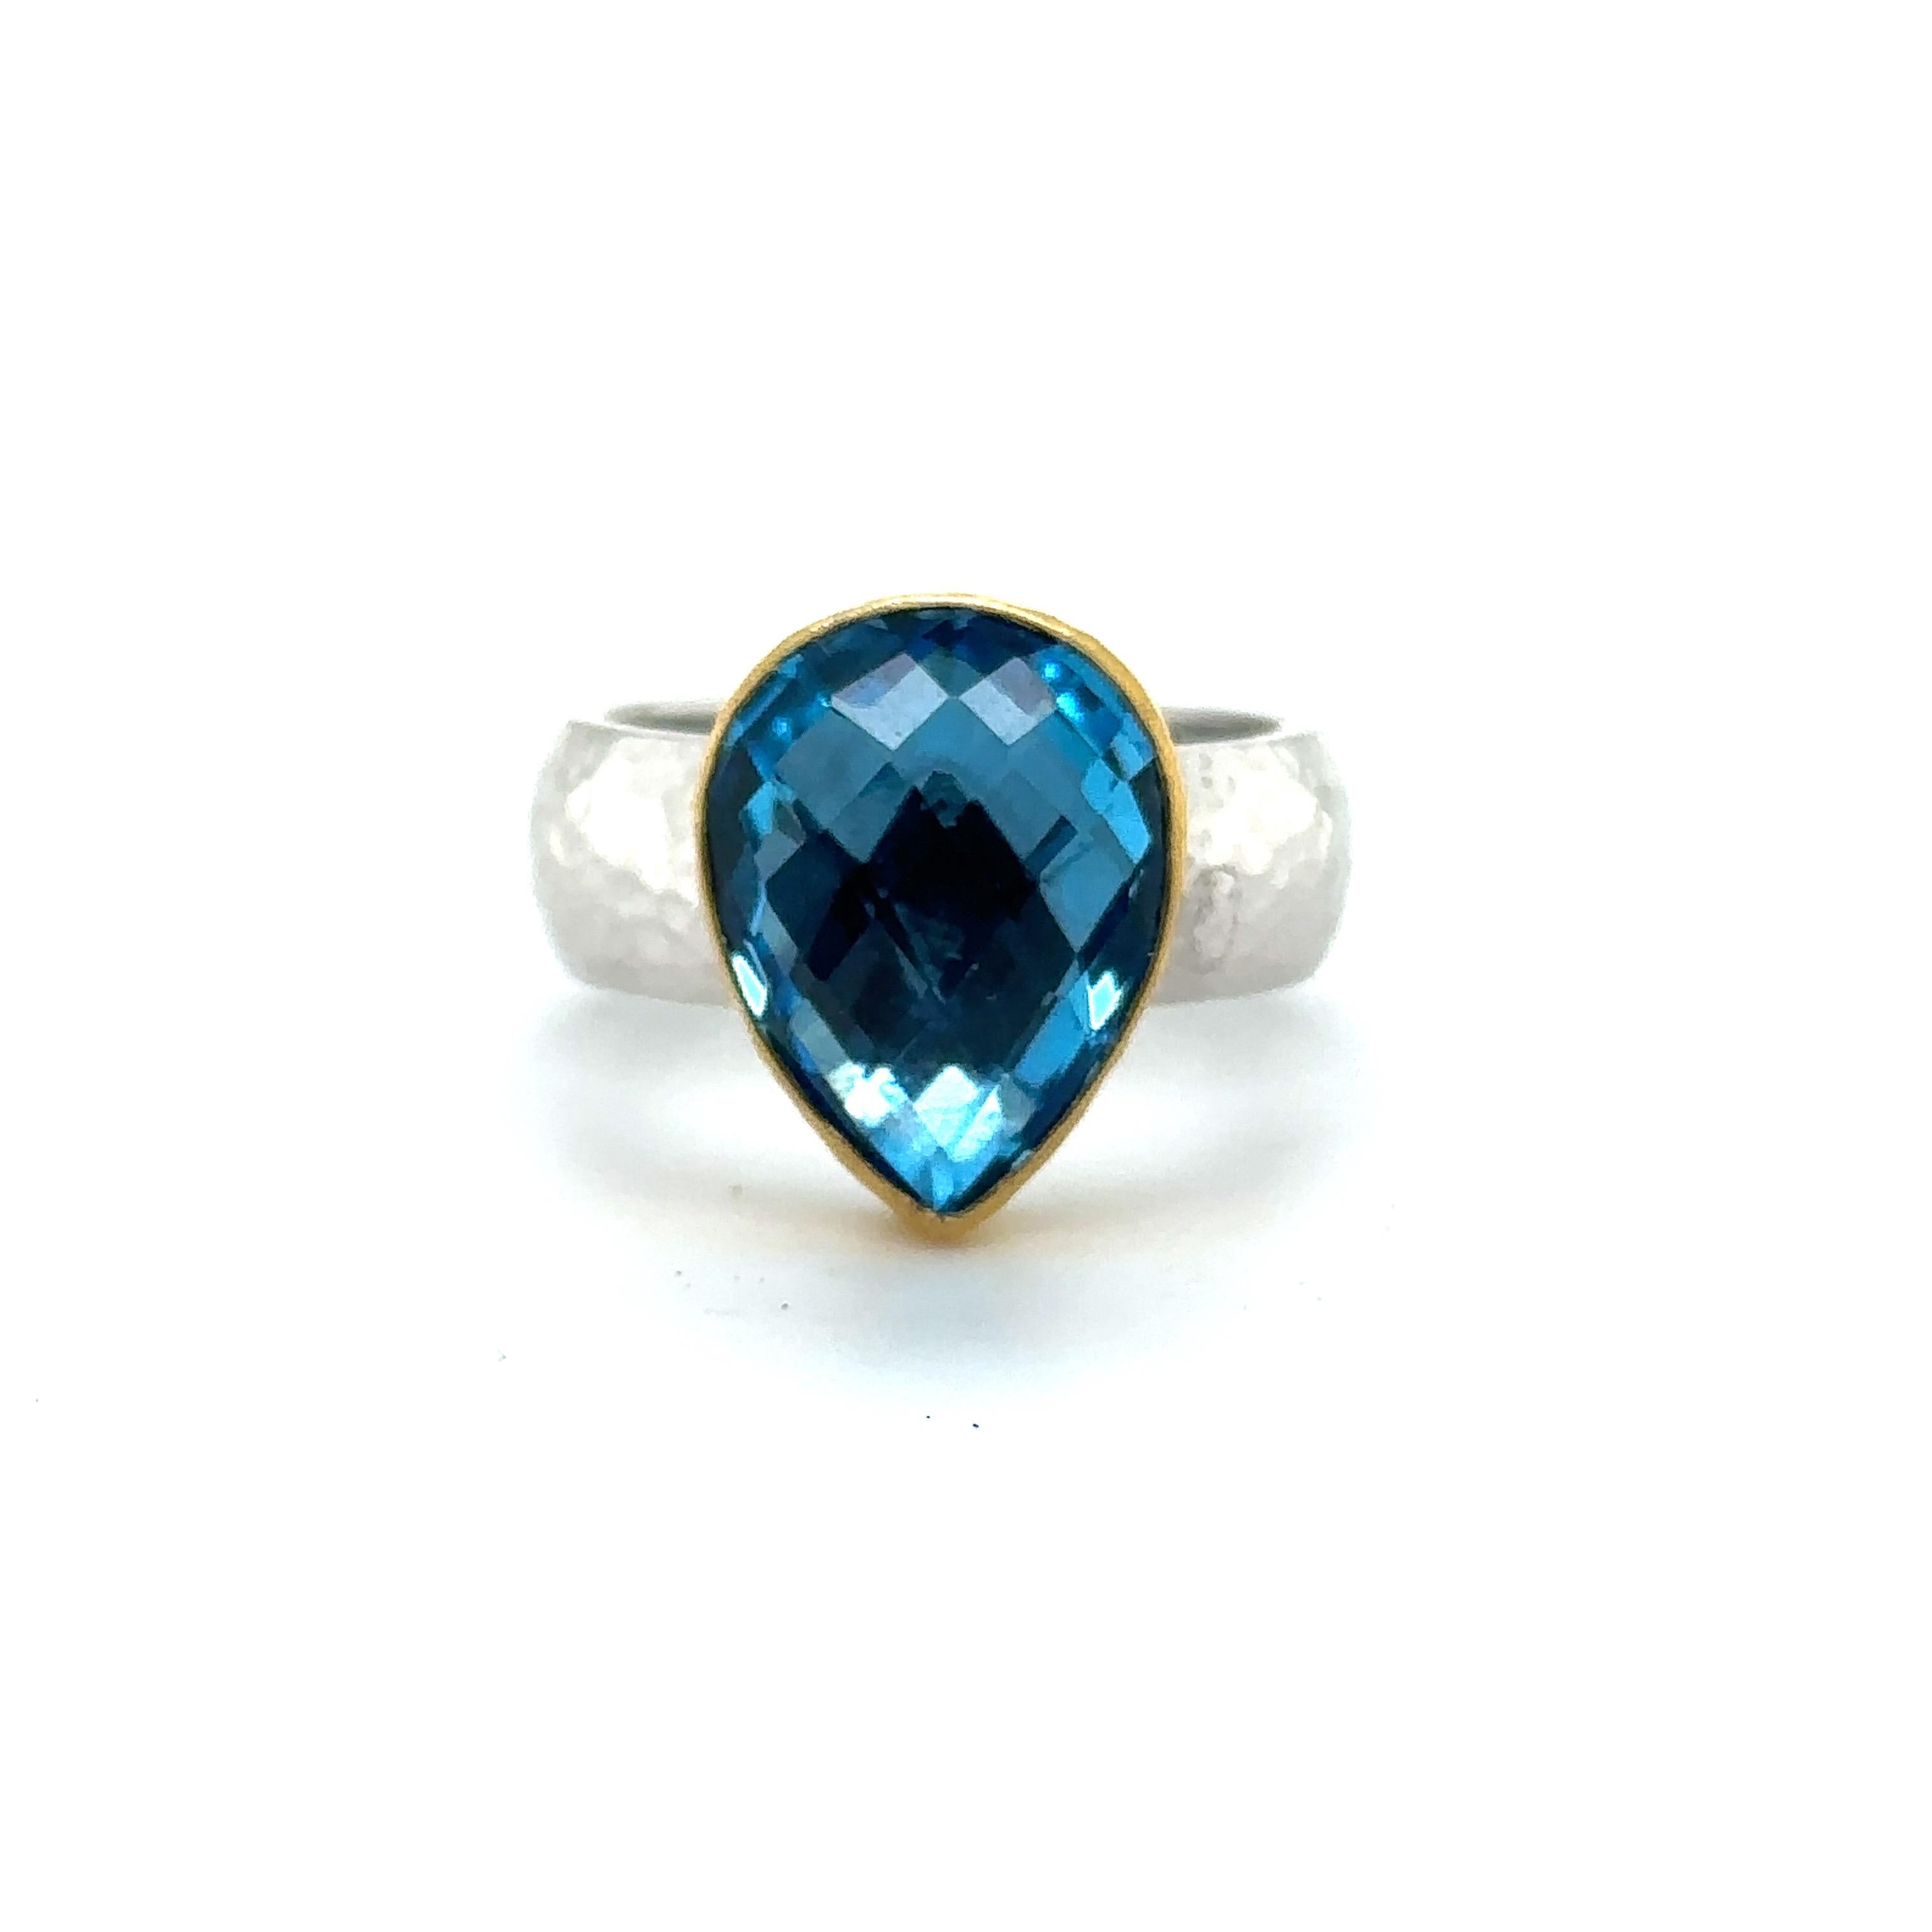 24KT GOLD/SS RING 8.00CT with PEAR SHAPE SWISS BLUE TOPAZ
Metal: 24K GOLD/ SS
Stone Info: 8.00CT PEAR SHAPE SWISS BLUE TOPAZ
Total Stone Weight: 8.00 Cwt.
Item Weight: 11.05 gm
Ring Size: 8  (Re-sizable)
Measurements:  16.5mm X 12.5mm
